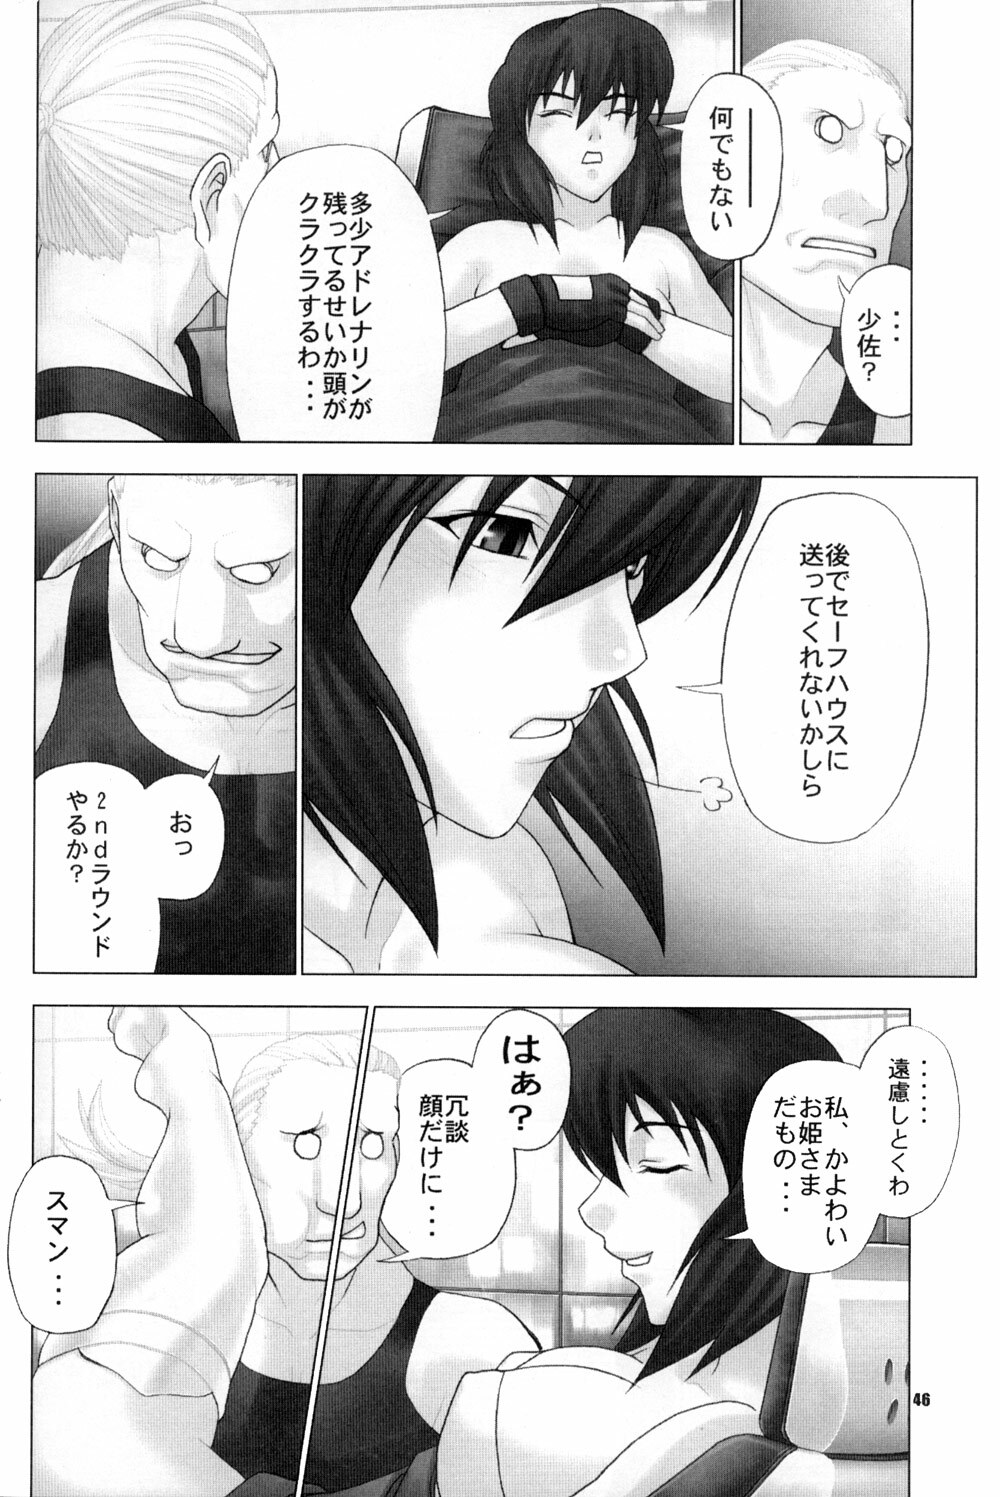 (C66) [Runners High (Chiba Toshirou)] CELLULOID - ACME (Ghost in the Shell) page 46 full